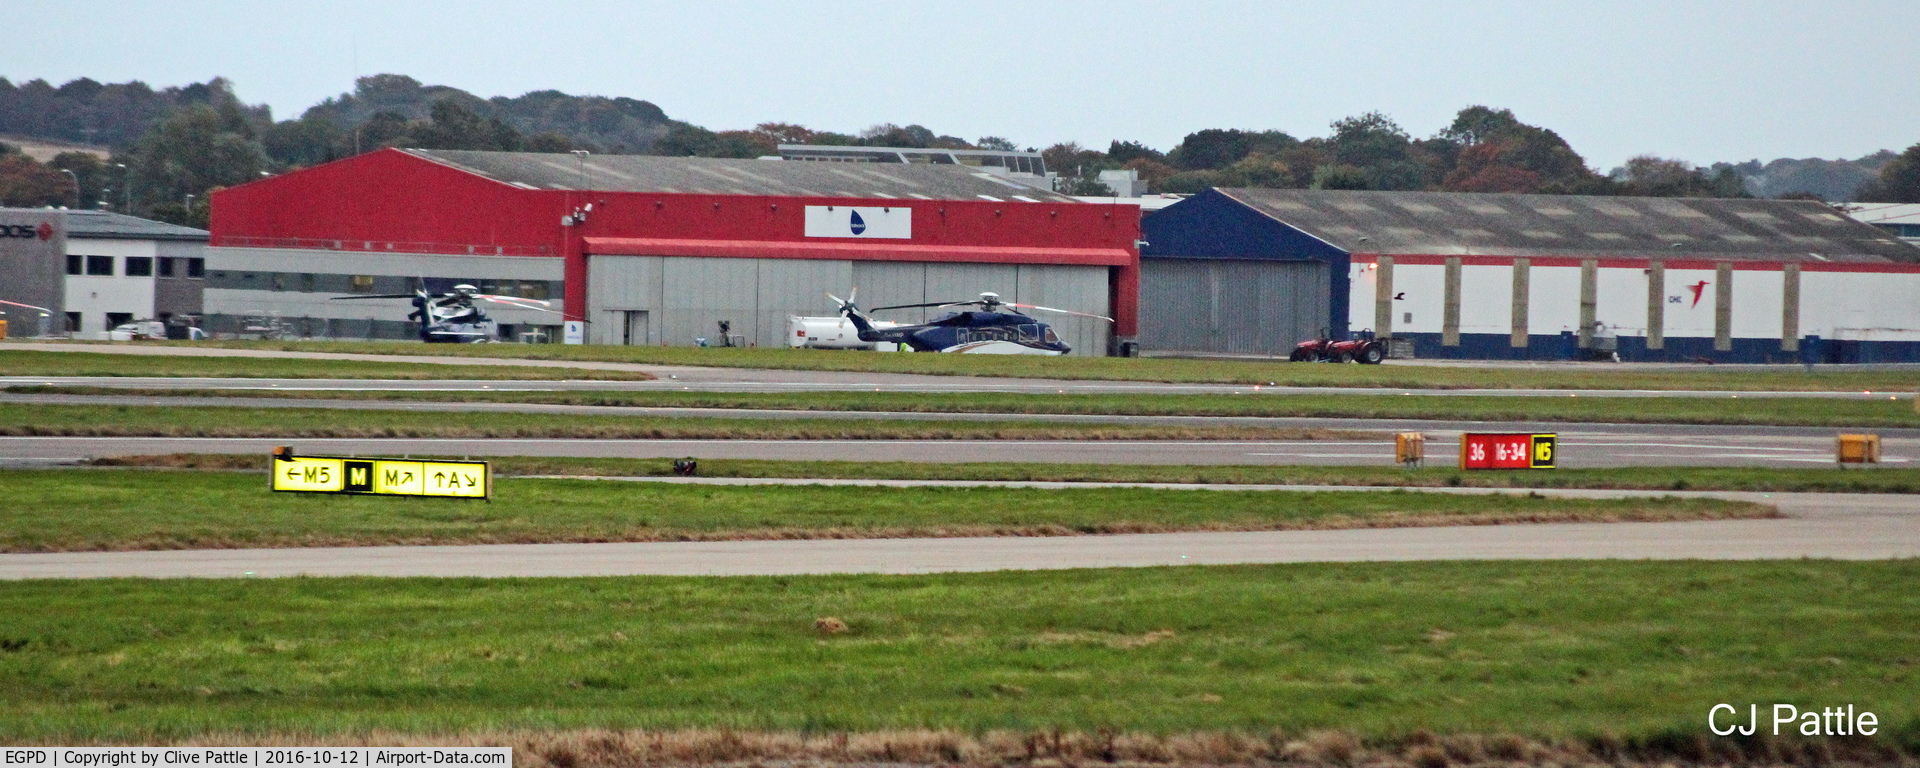 Aberdeen Airport, Aberdeen, Scotland United Kingdom (EGPD) - The Bond Helicopters hangar at ABZ has now lost its titles and now displays the 'Babcock MCS' signs